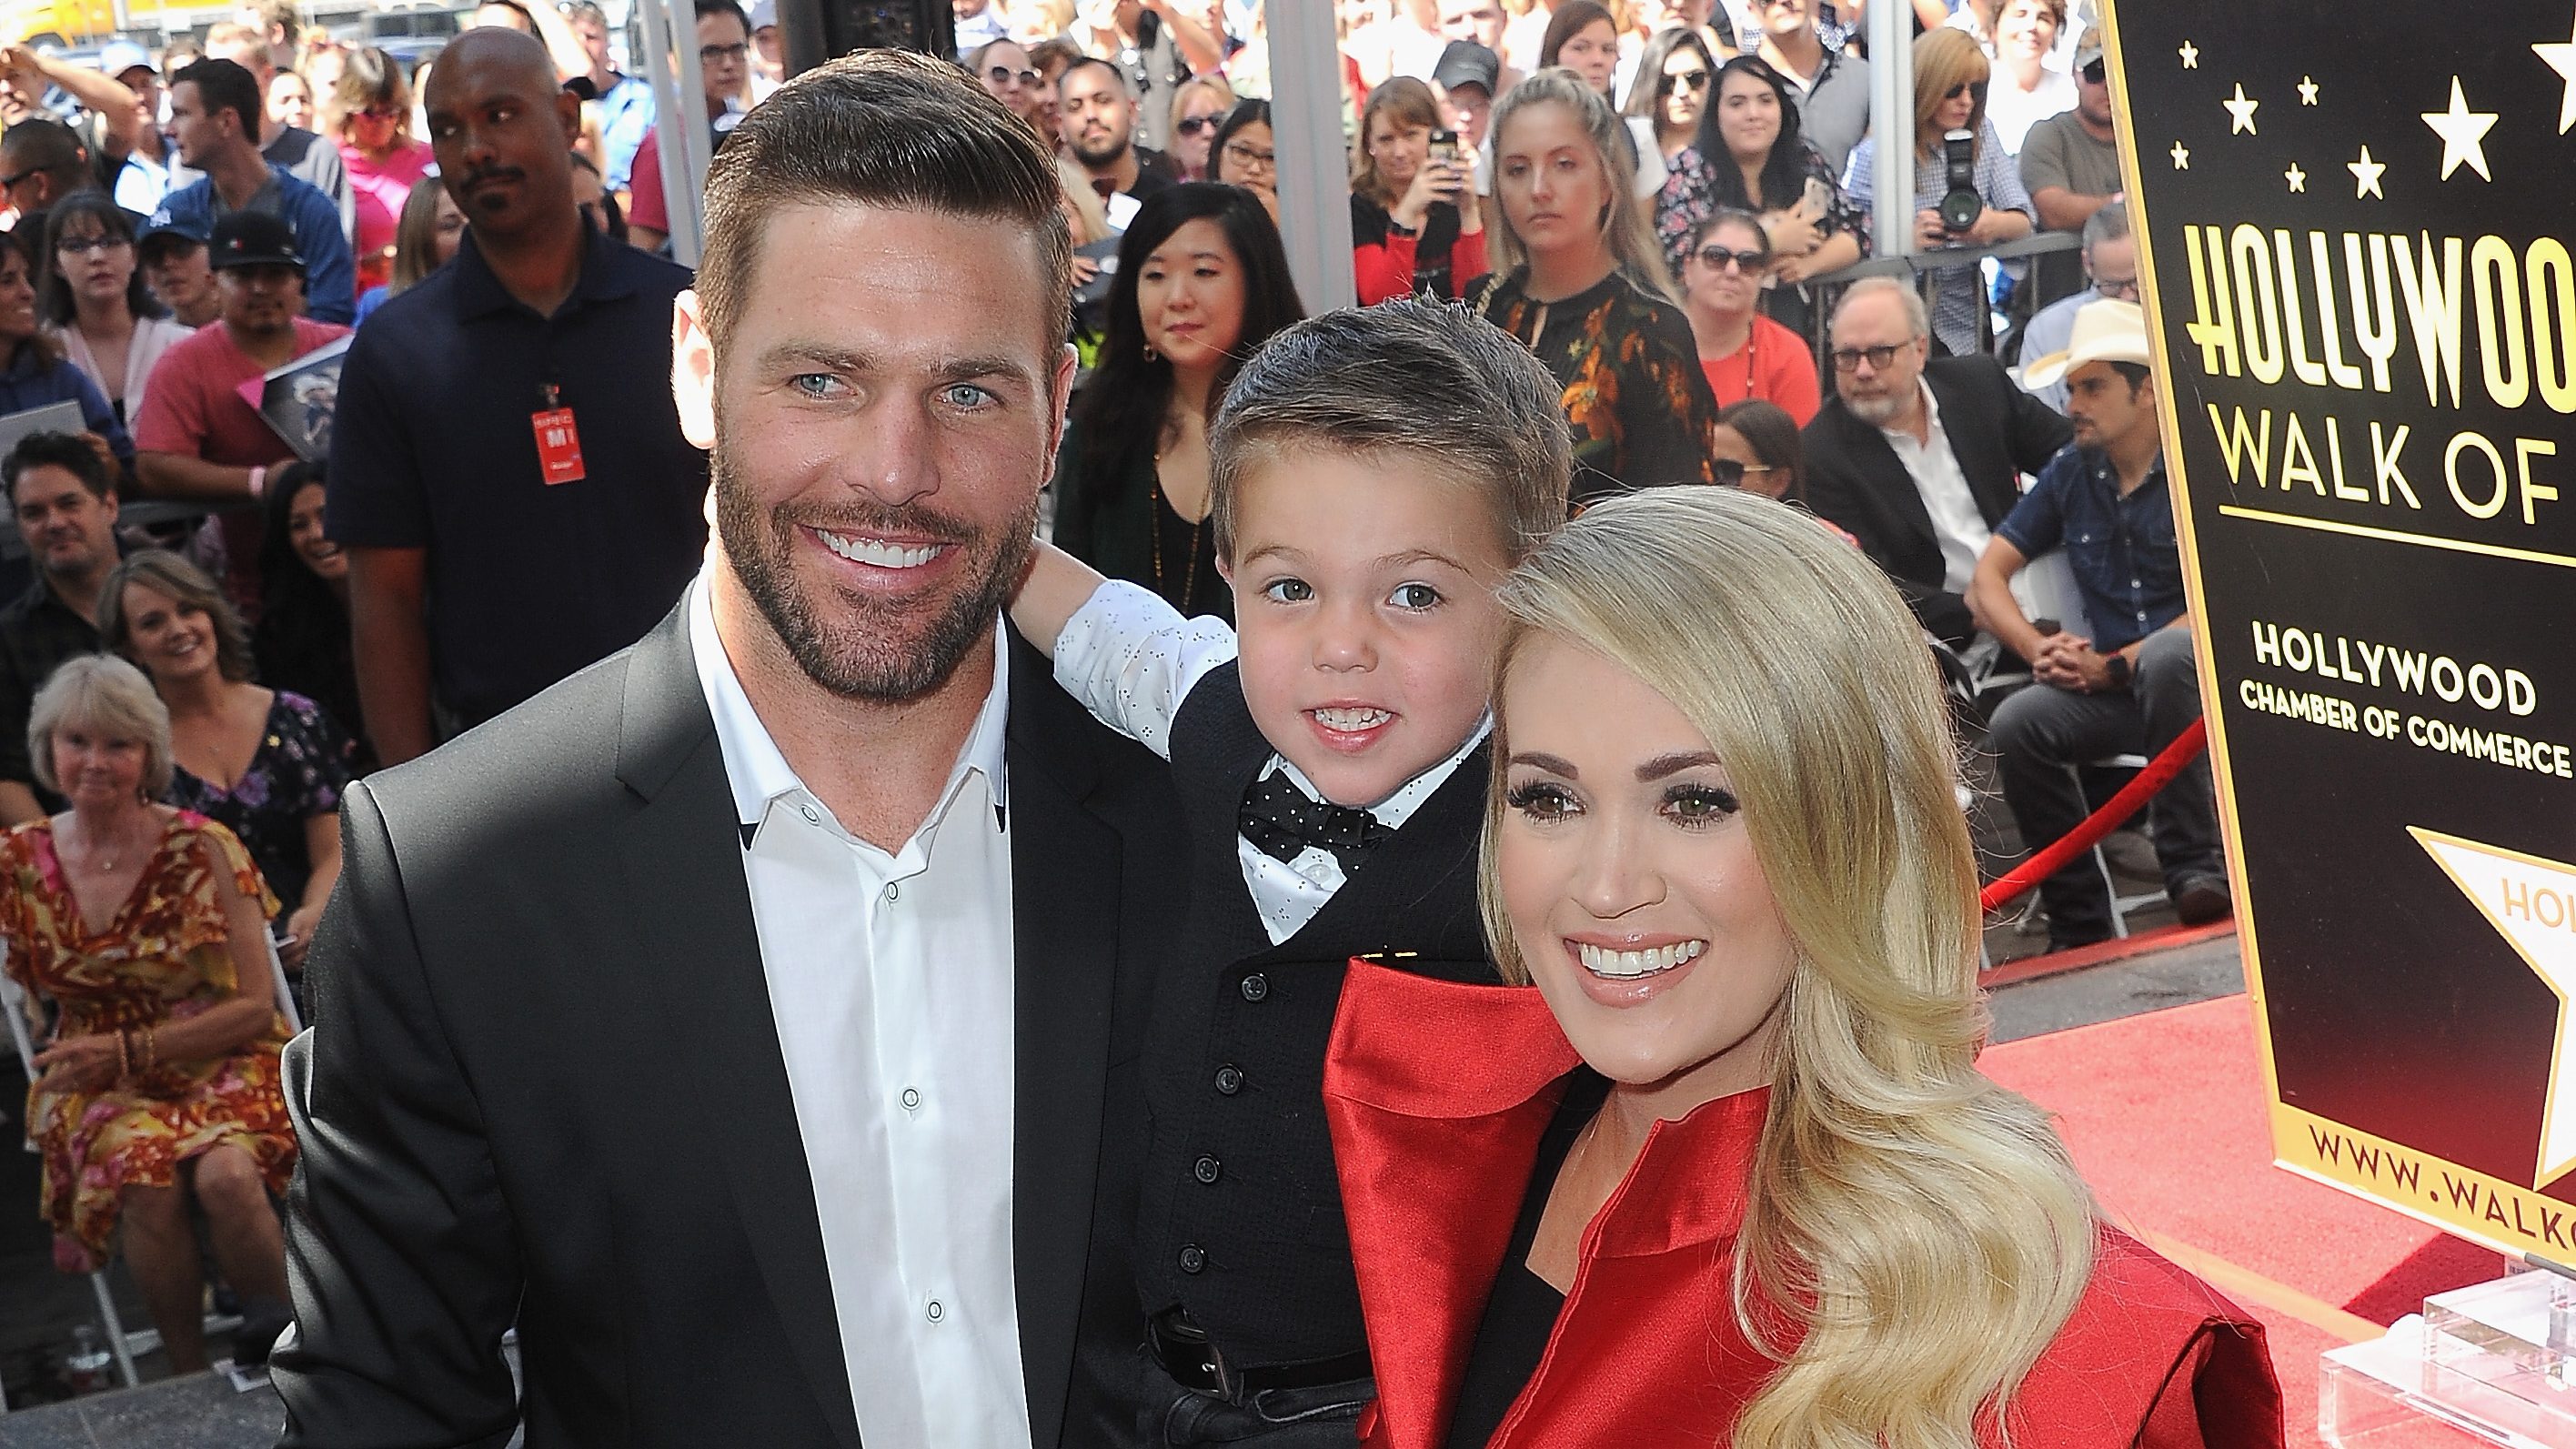 Carrie Underwood's Husband Mike Fisher and Son Isaiah Drop Puck at